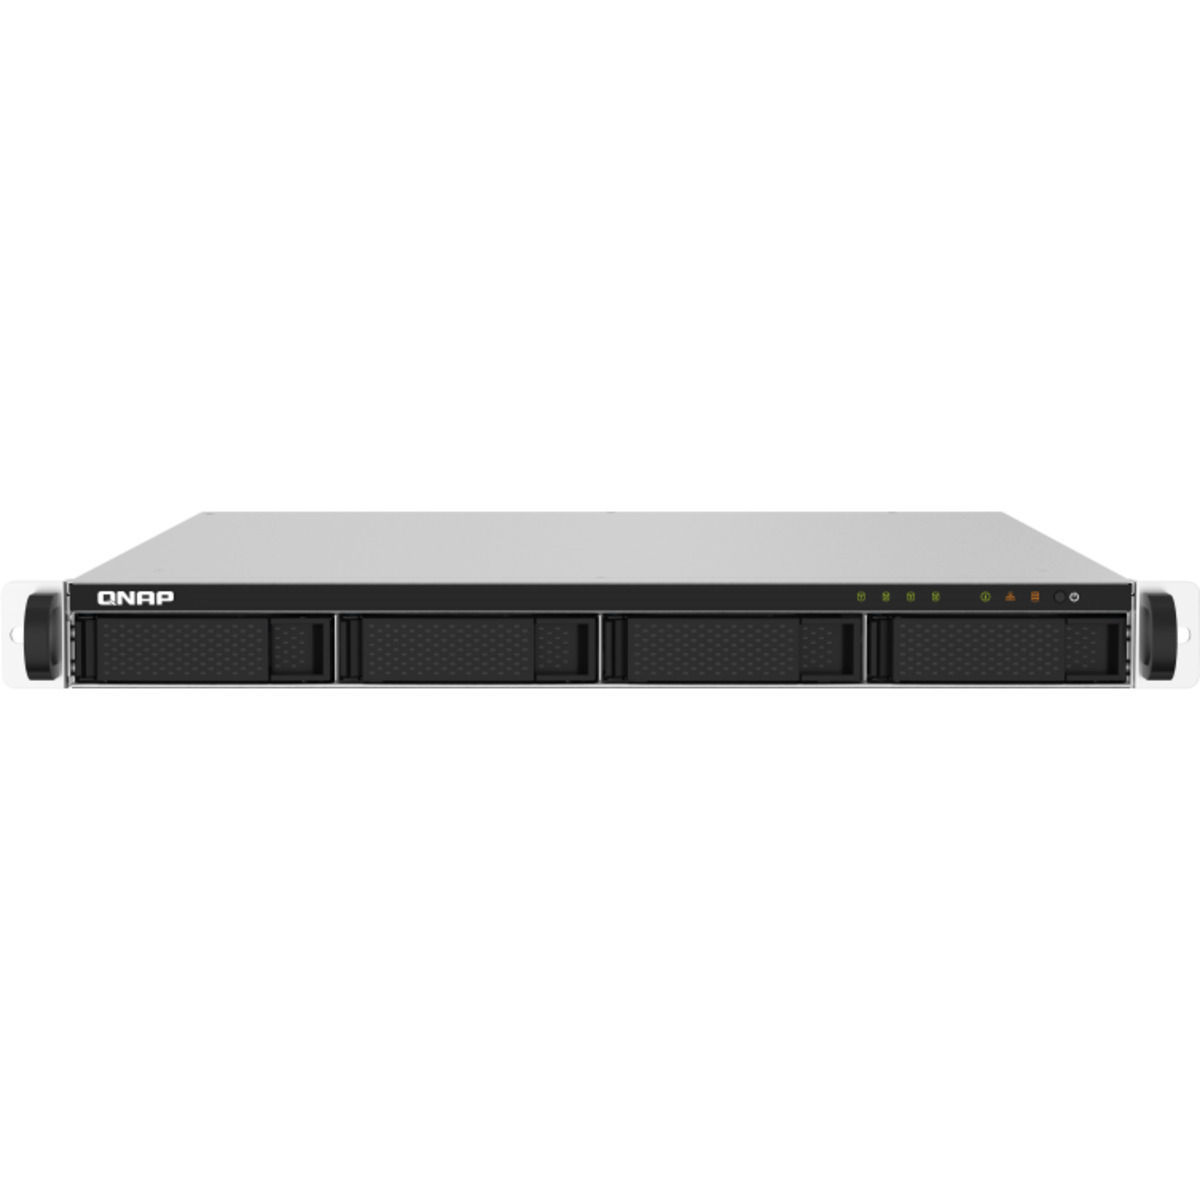 buy $2095 QNAP TS-432PXU-RP 32tb RackMount NAS - Network Attached Storage Device 4x8000gb Toshiba Enterprise Capacity MG08ADA800E 3.5 7200rpm SATA 6Gb/s HDD ENTERPRISE Class Drives Installed - Burn-In Tested - ON SALE - FREE RAM UPGRADE - nas headquarters buy network attached storage server device das new raid-5 free shipping usa christmas new year holiday sale TS-432PXU-RP